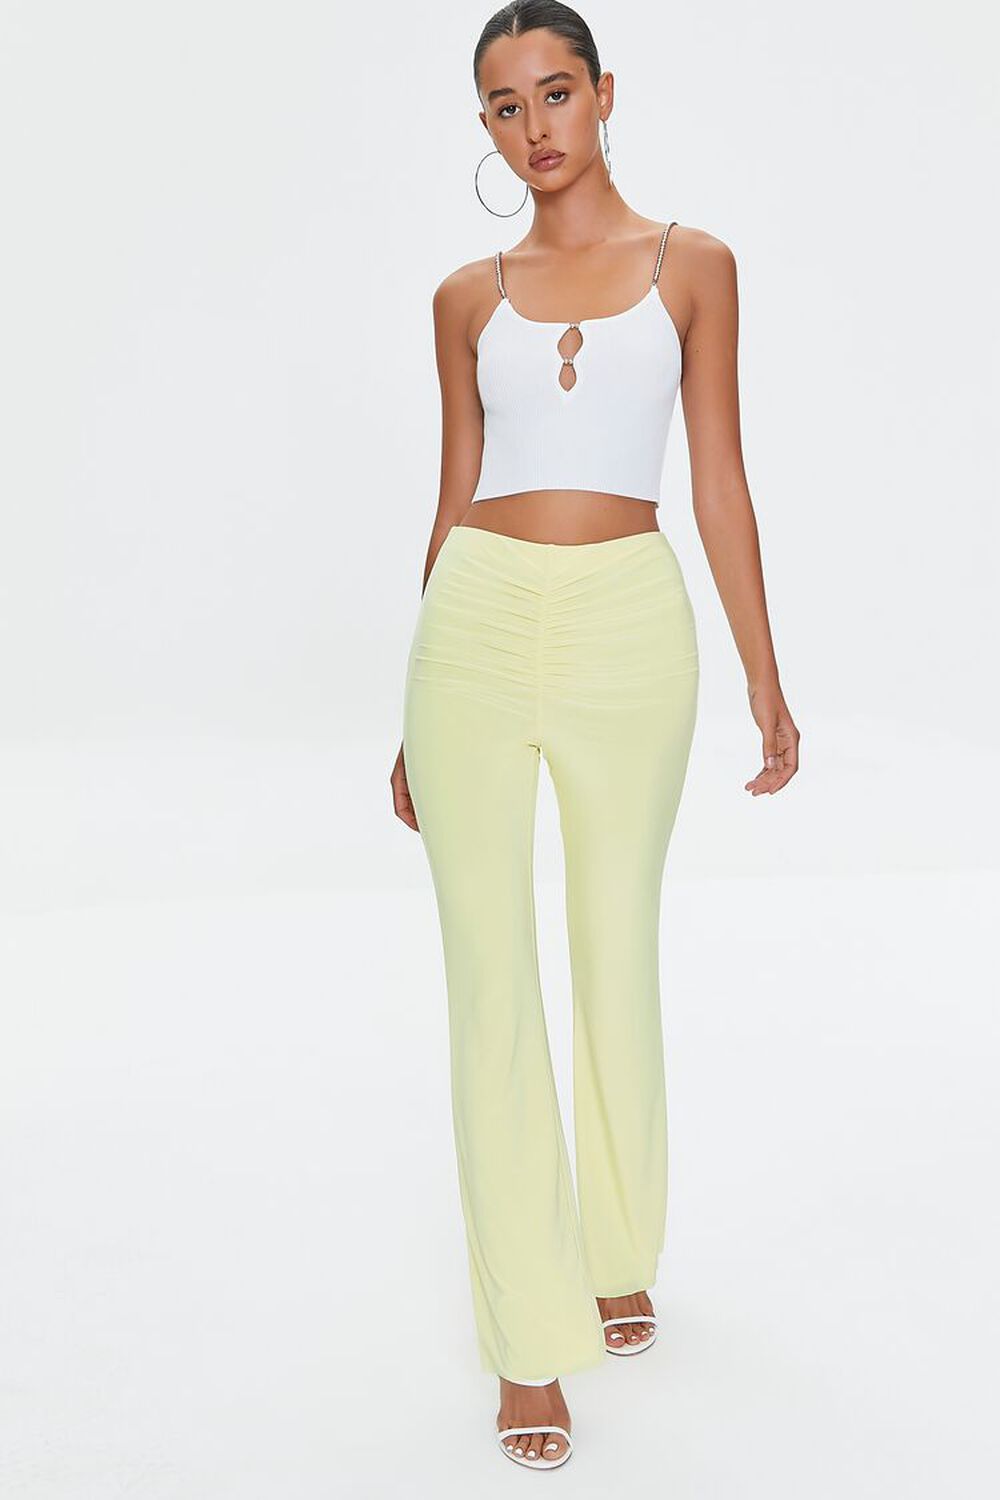 PALE YELLOW Ruched High-Rise Pants, image 1